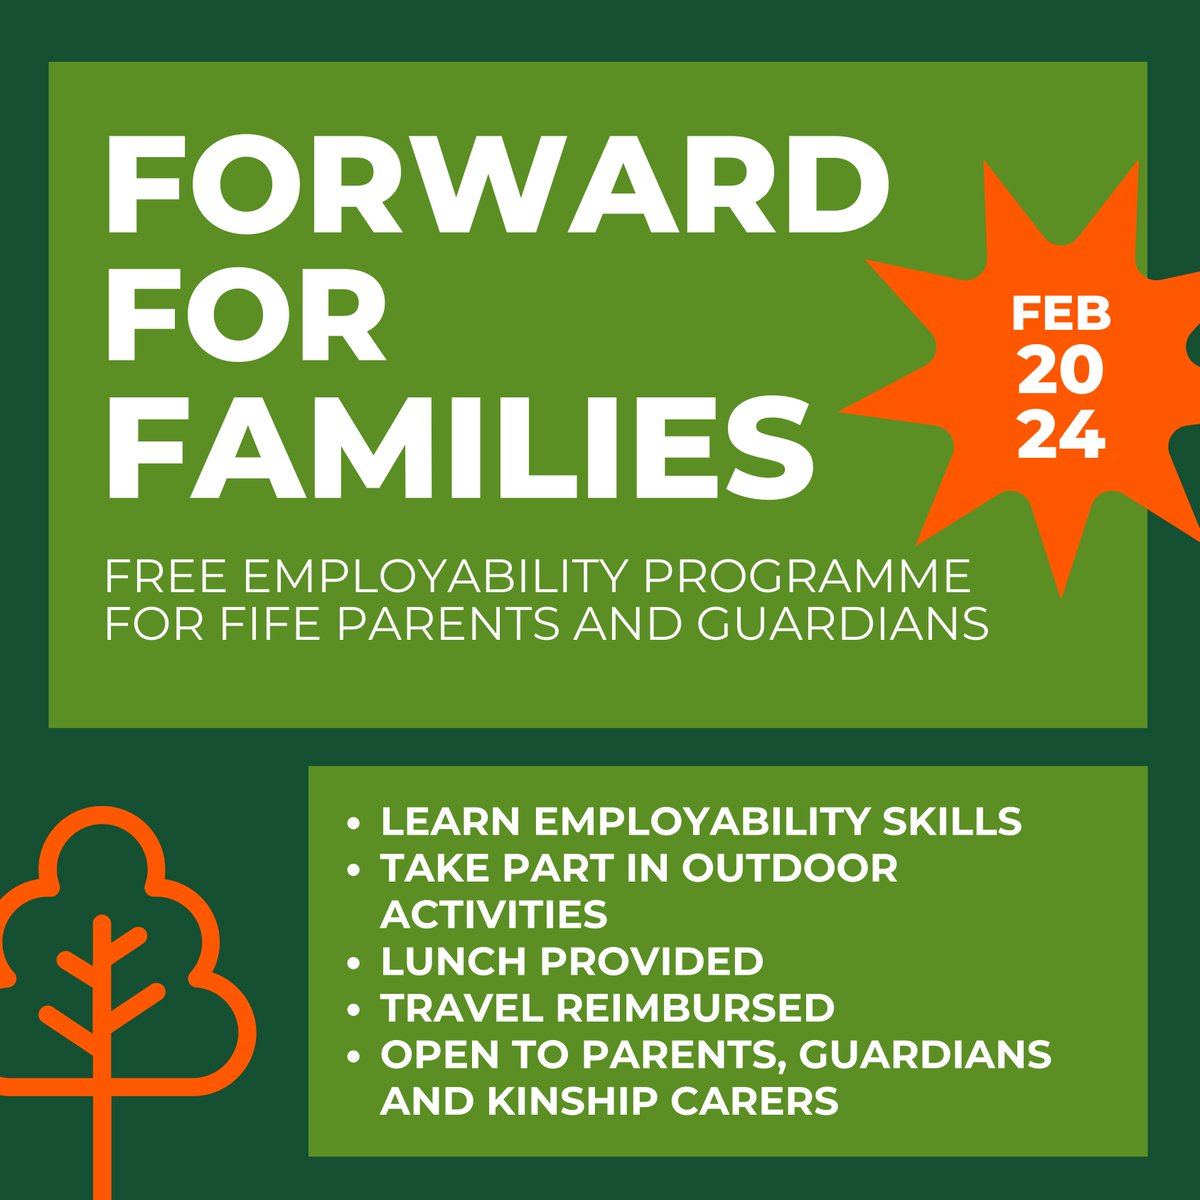 Referrals to our Forward for Families employment programme for Fife parents, guardians and carers today are open 🌱

Learn more and make a referral here: bit.ly/3u1TlNC

#WorkWithPurpose #PositiveFutures #Employability #Carers #Guardians #Parents #GetIntoWork #Skills